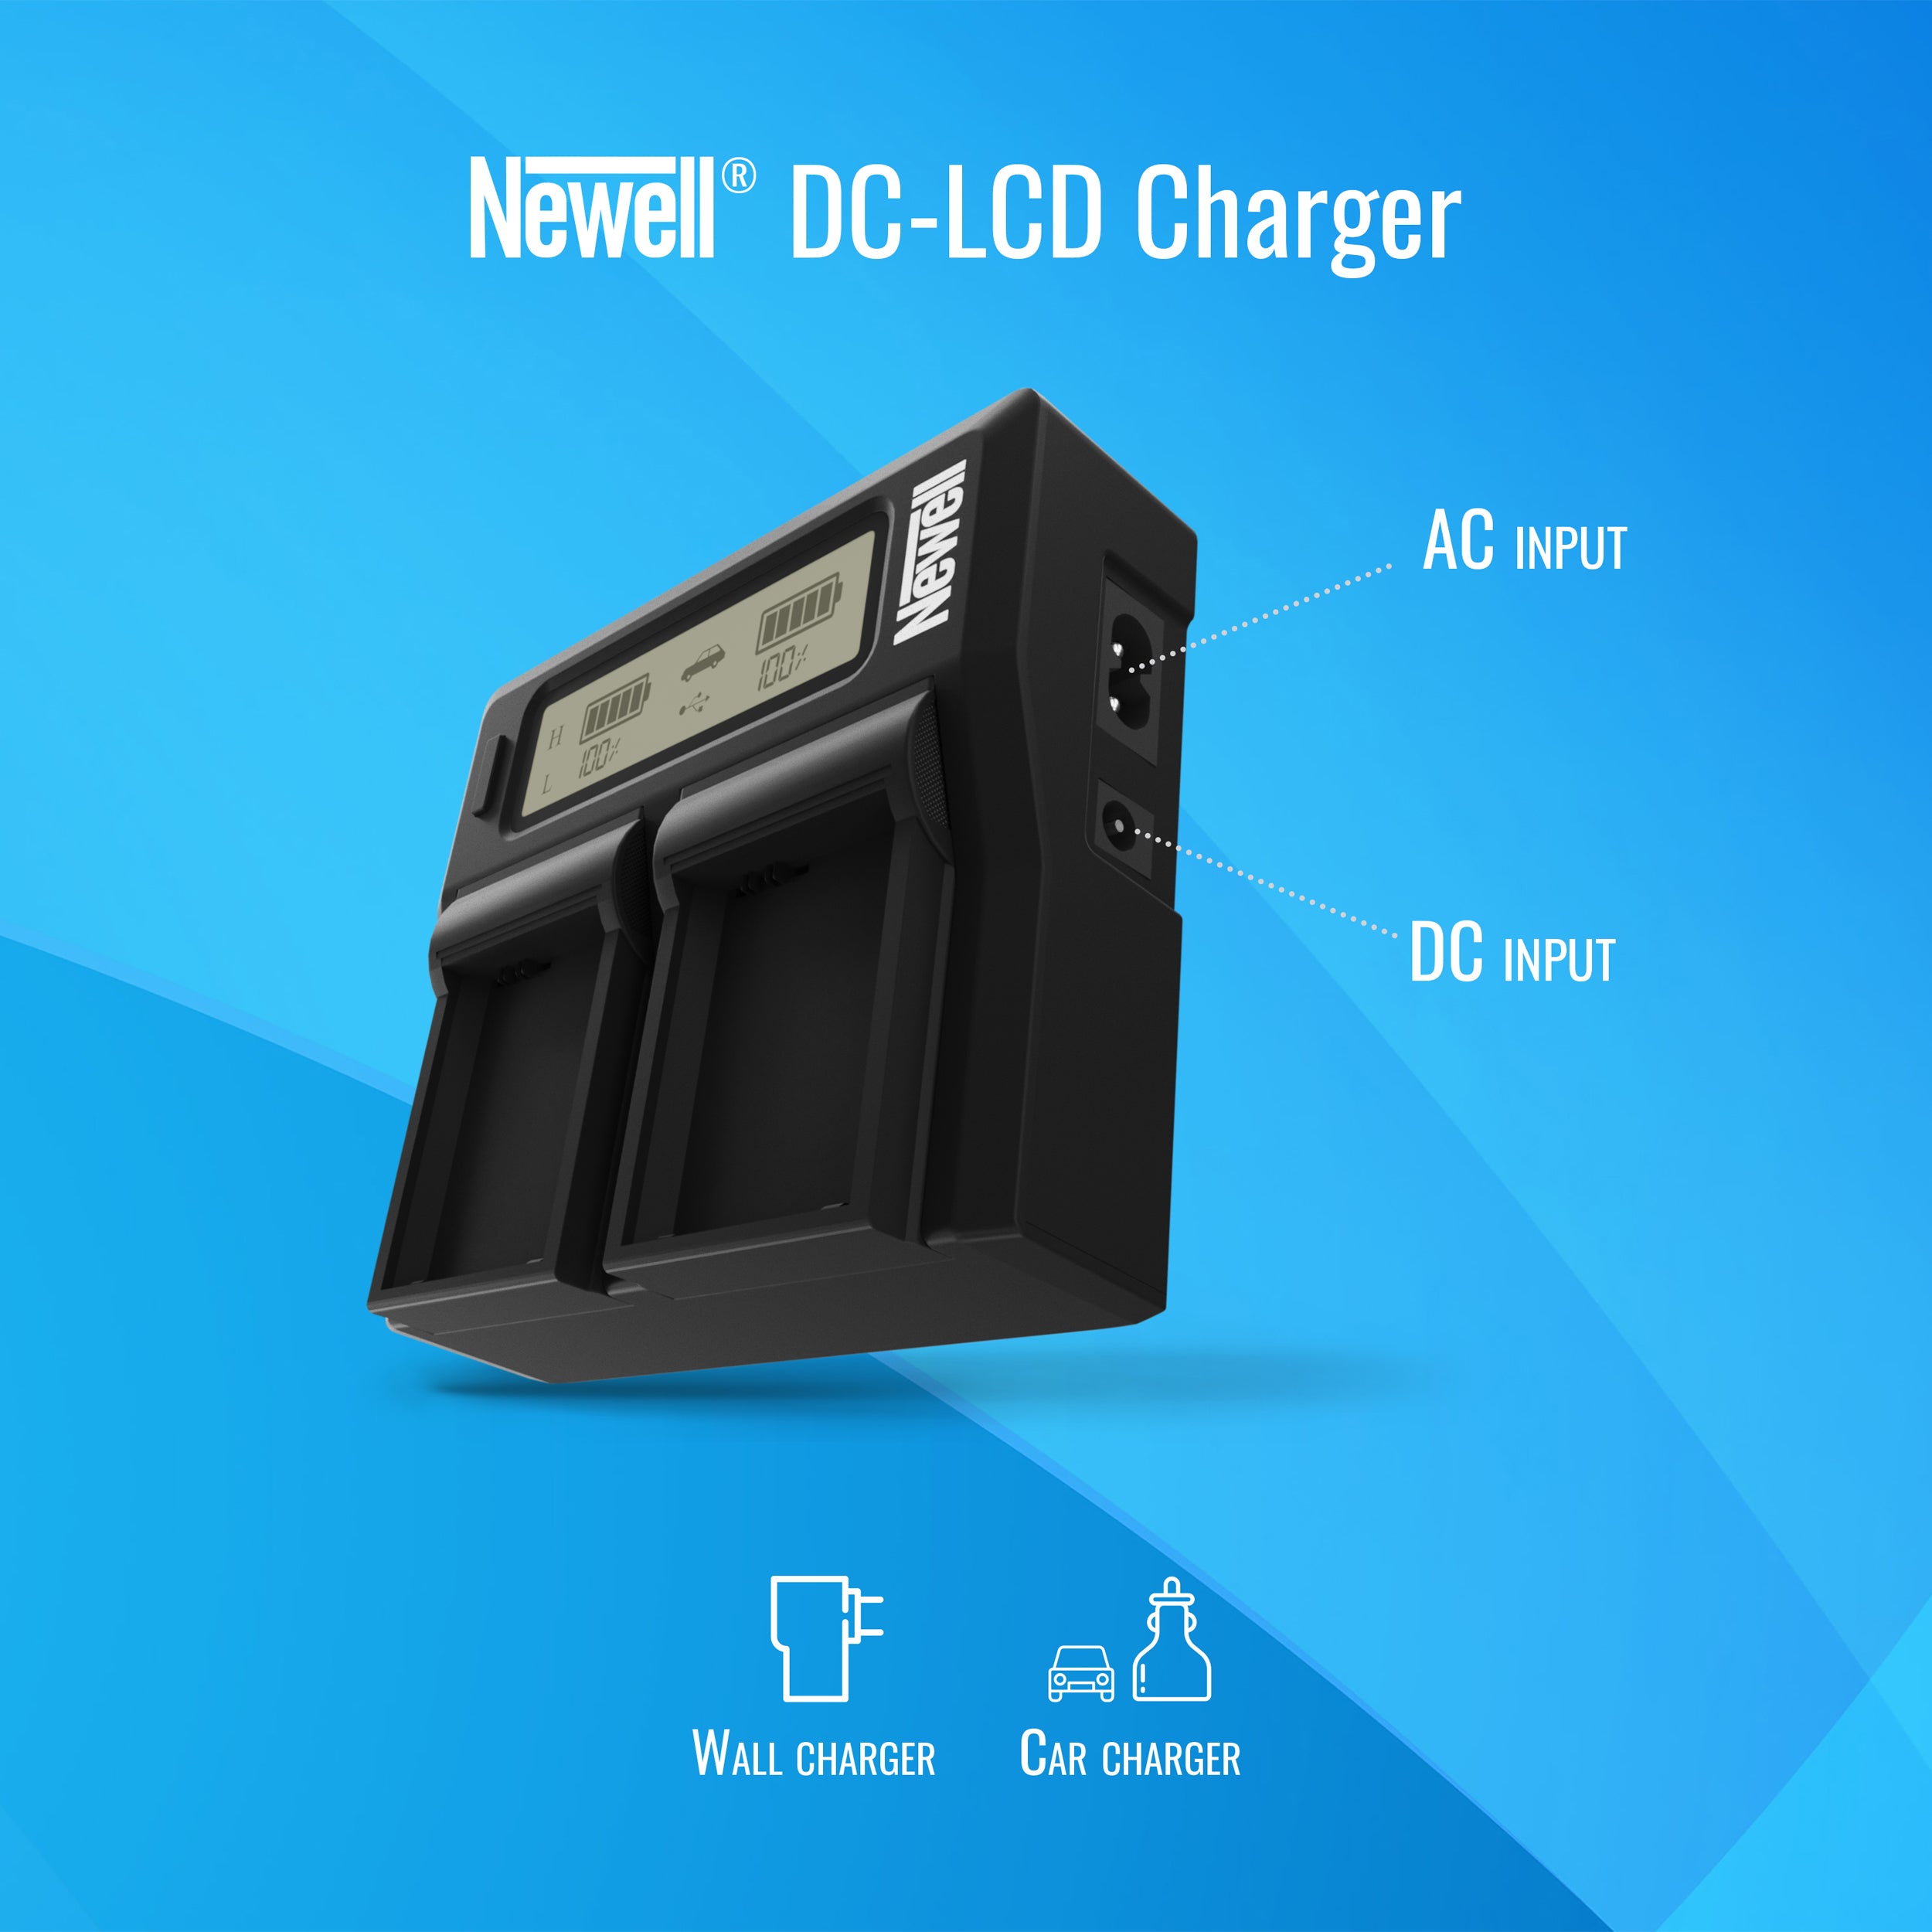 Newell DC-LCD dual channel battery charger for DMW-BLF19E batteries